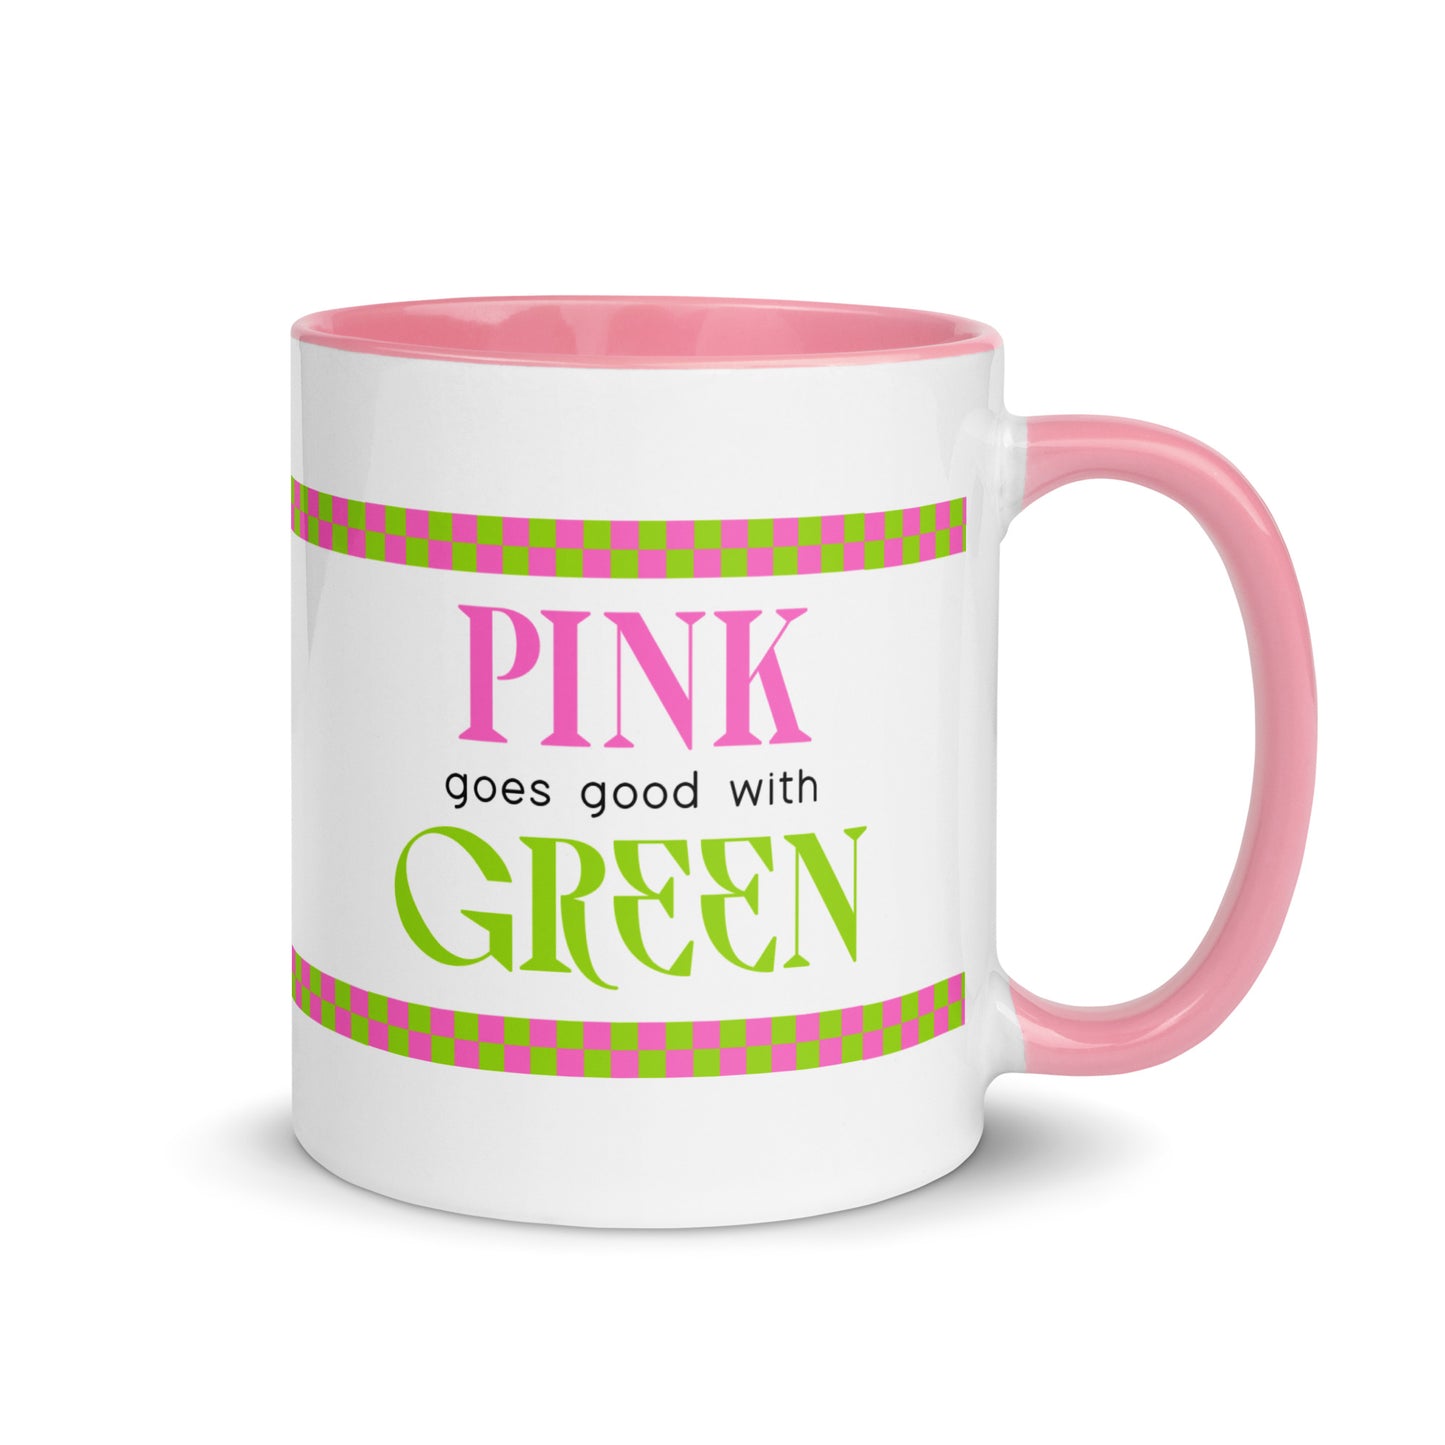 Complementary Colors Mug